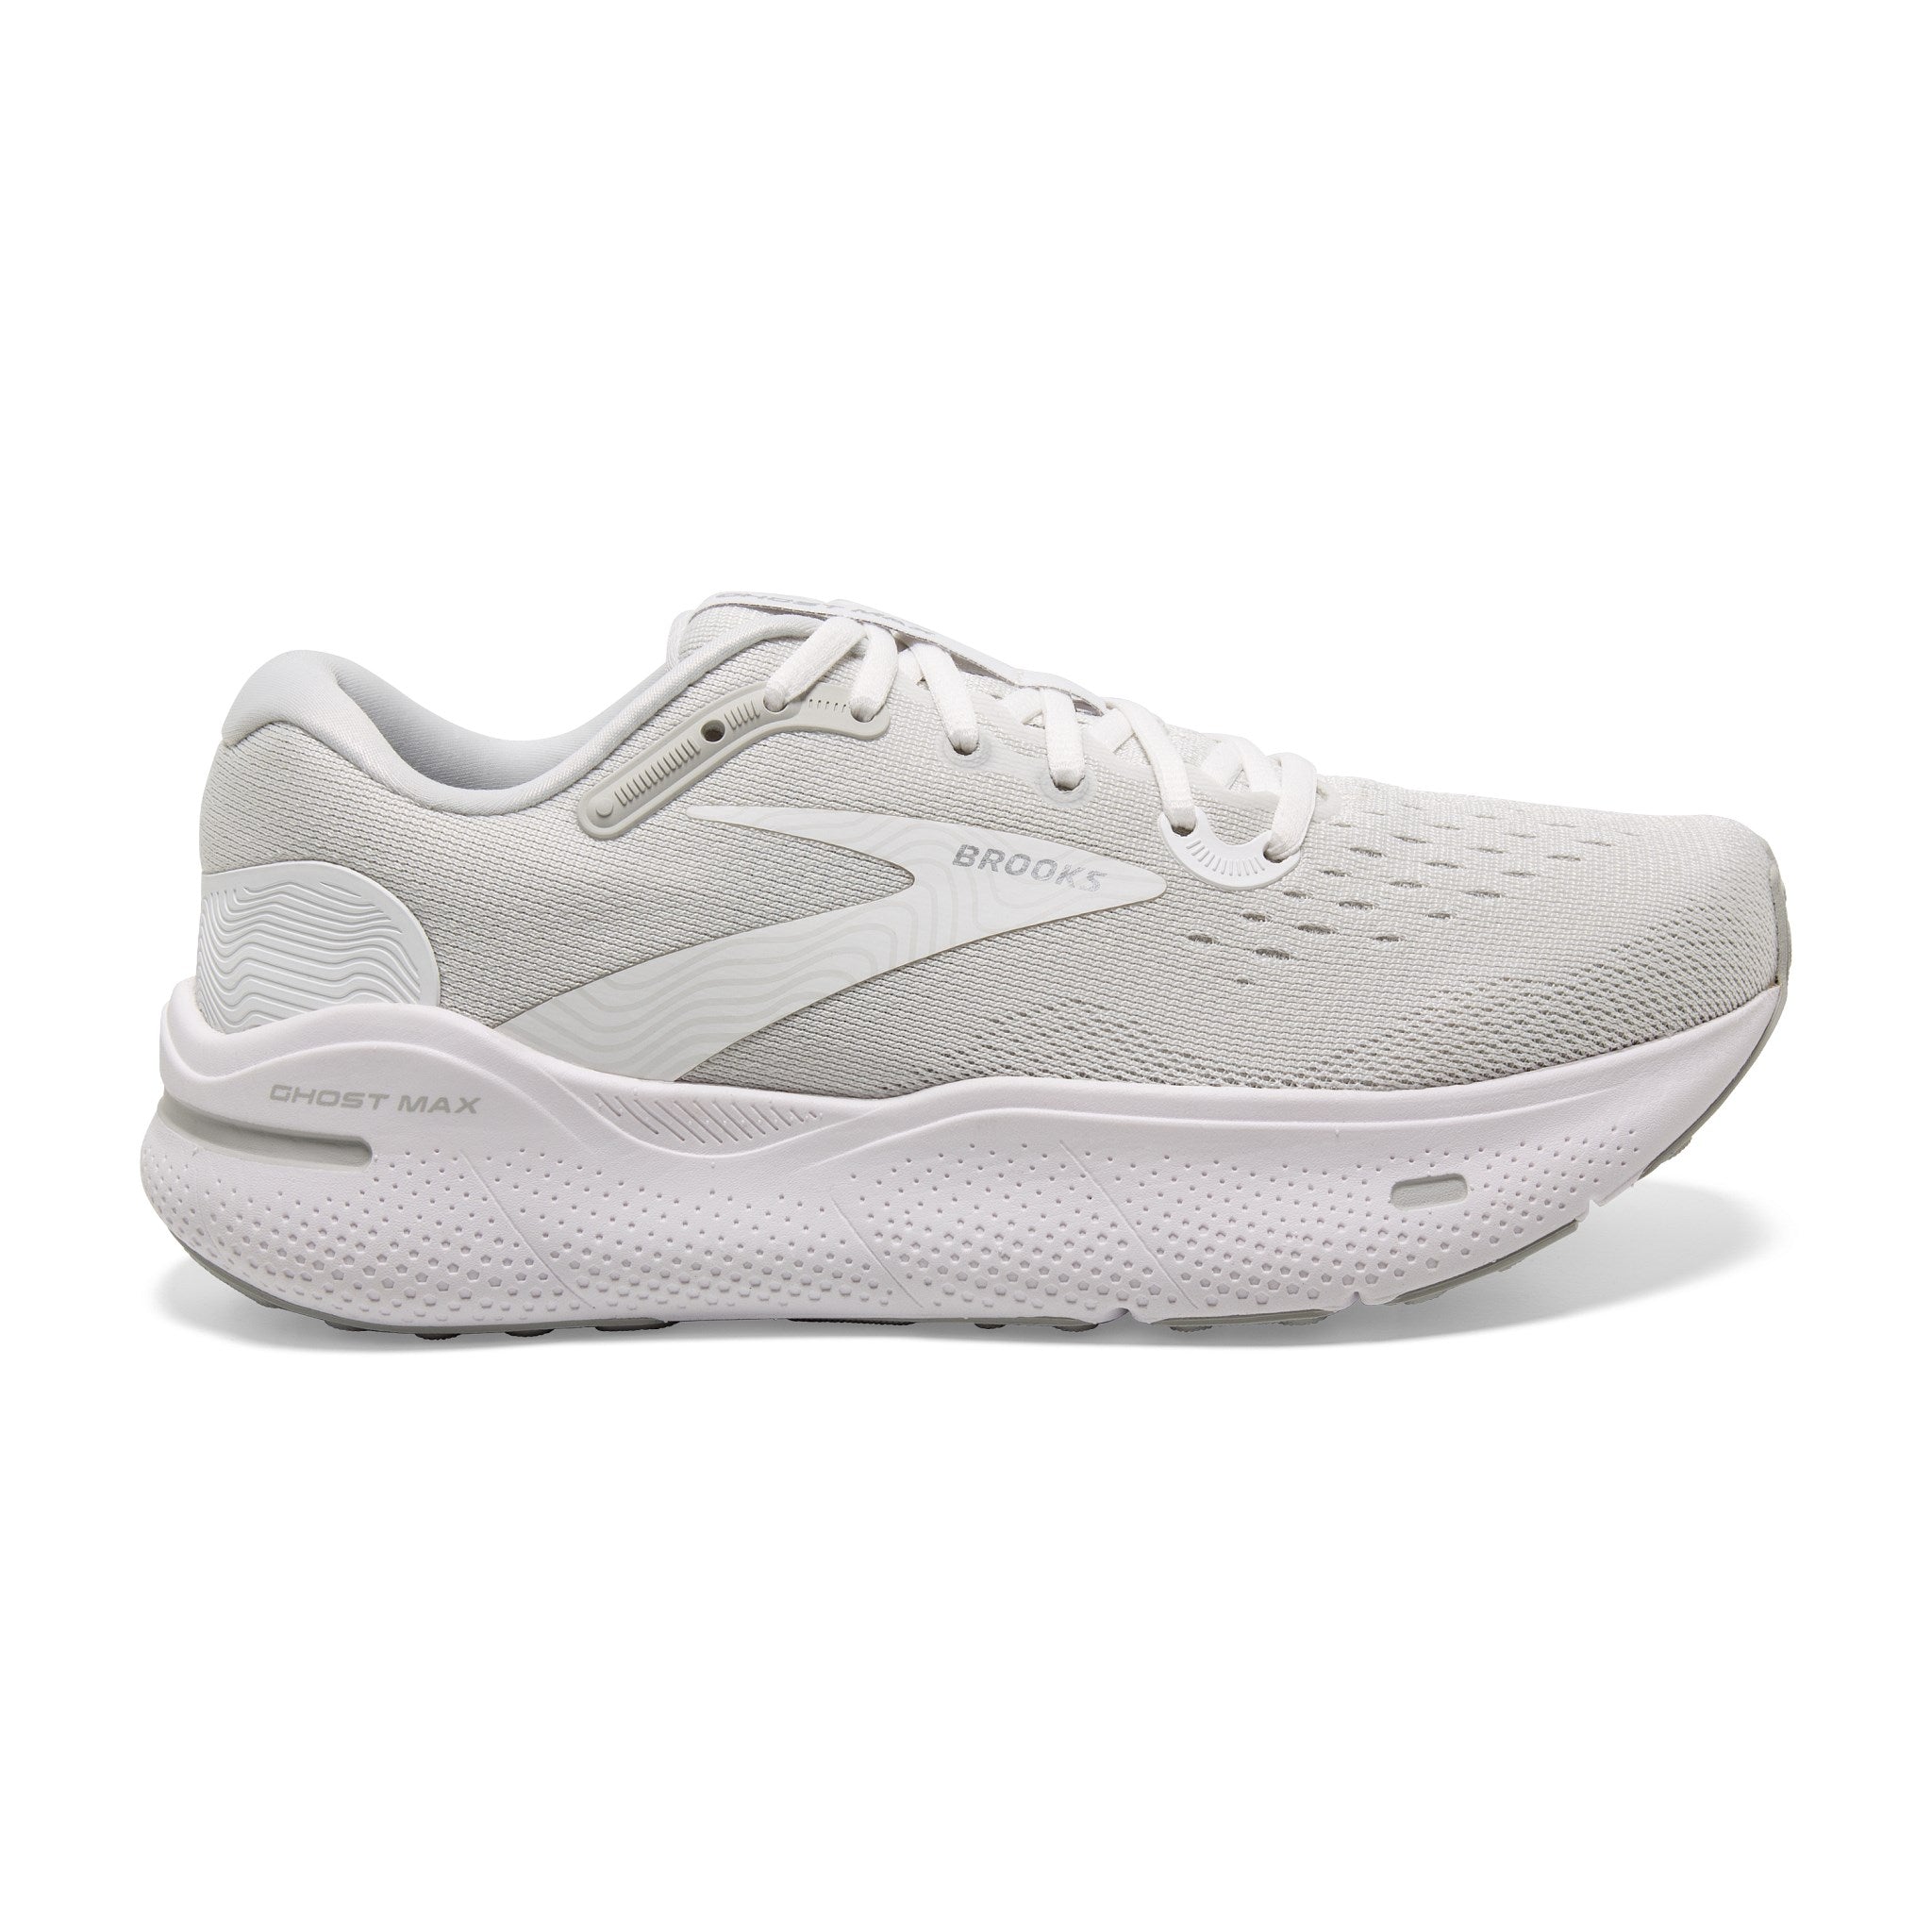 Women's Ghost Max - White / Oyster / Metallic Silver - 0